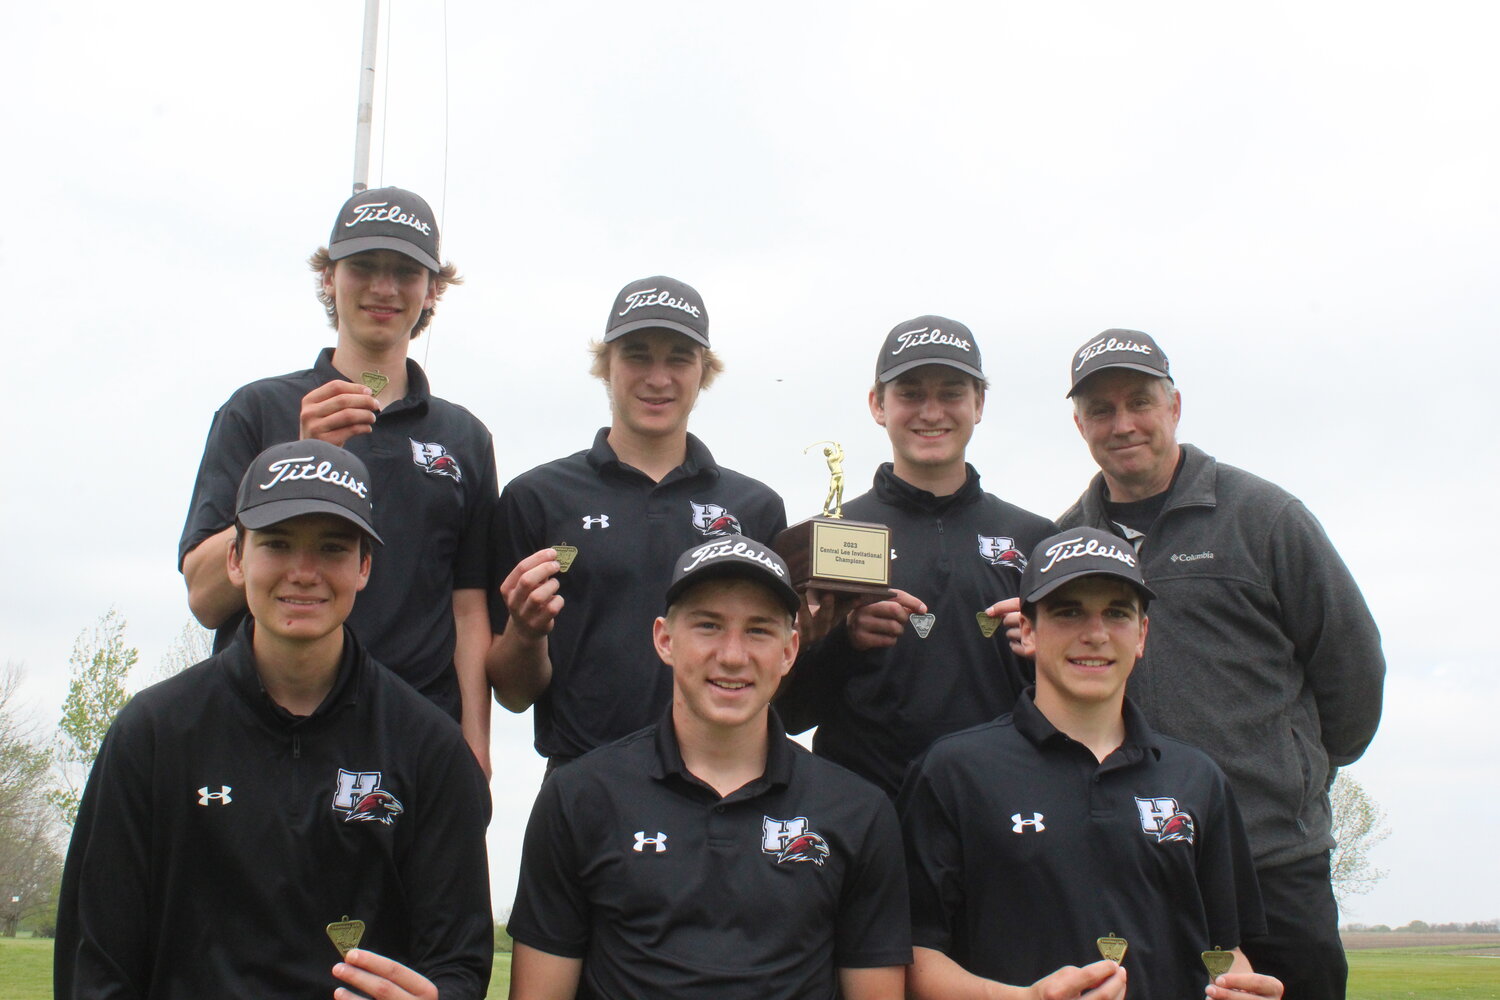 Hillcrest Academy's golf team celebrated after winning the Central Lee Invitational on May 6 in Donnellson.